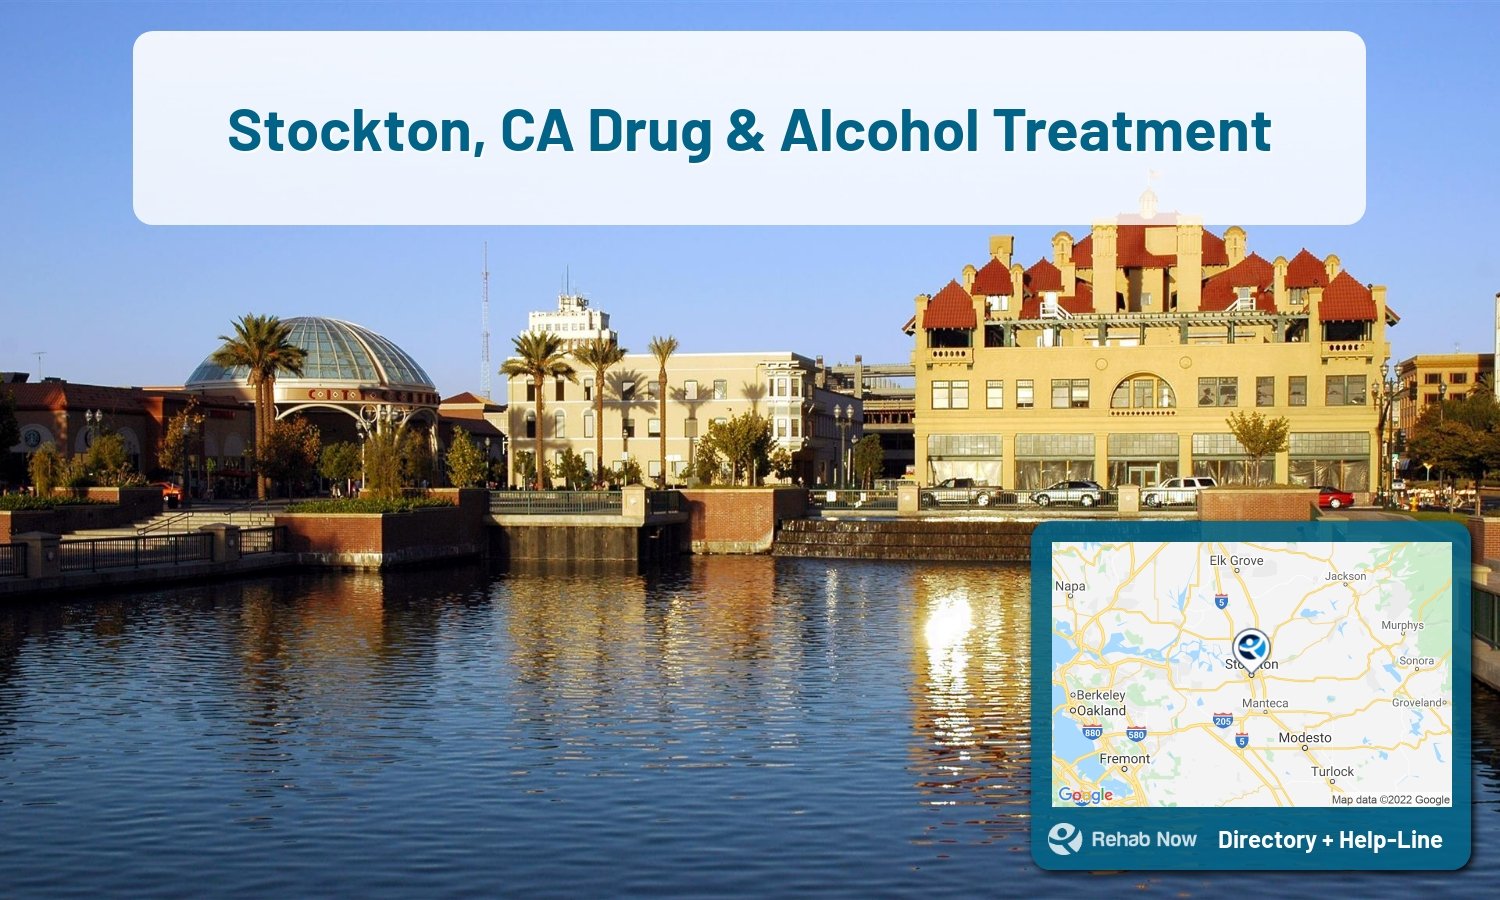 View options, availability, treatment methods, and more, for drug rehab and alcohol treatment in Stockton, California